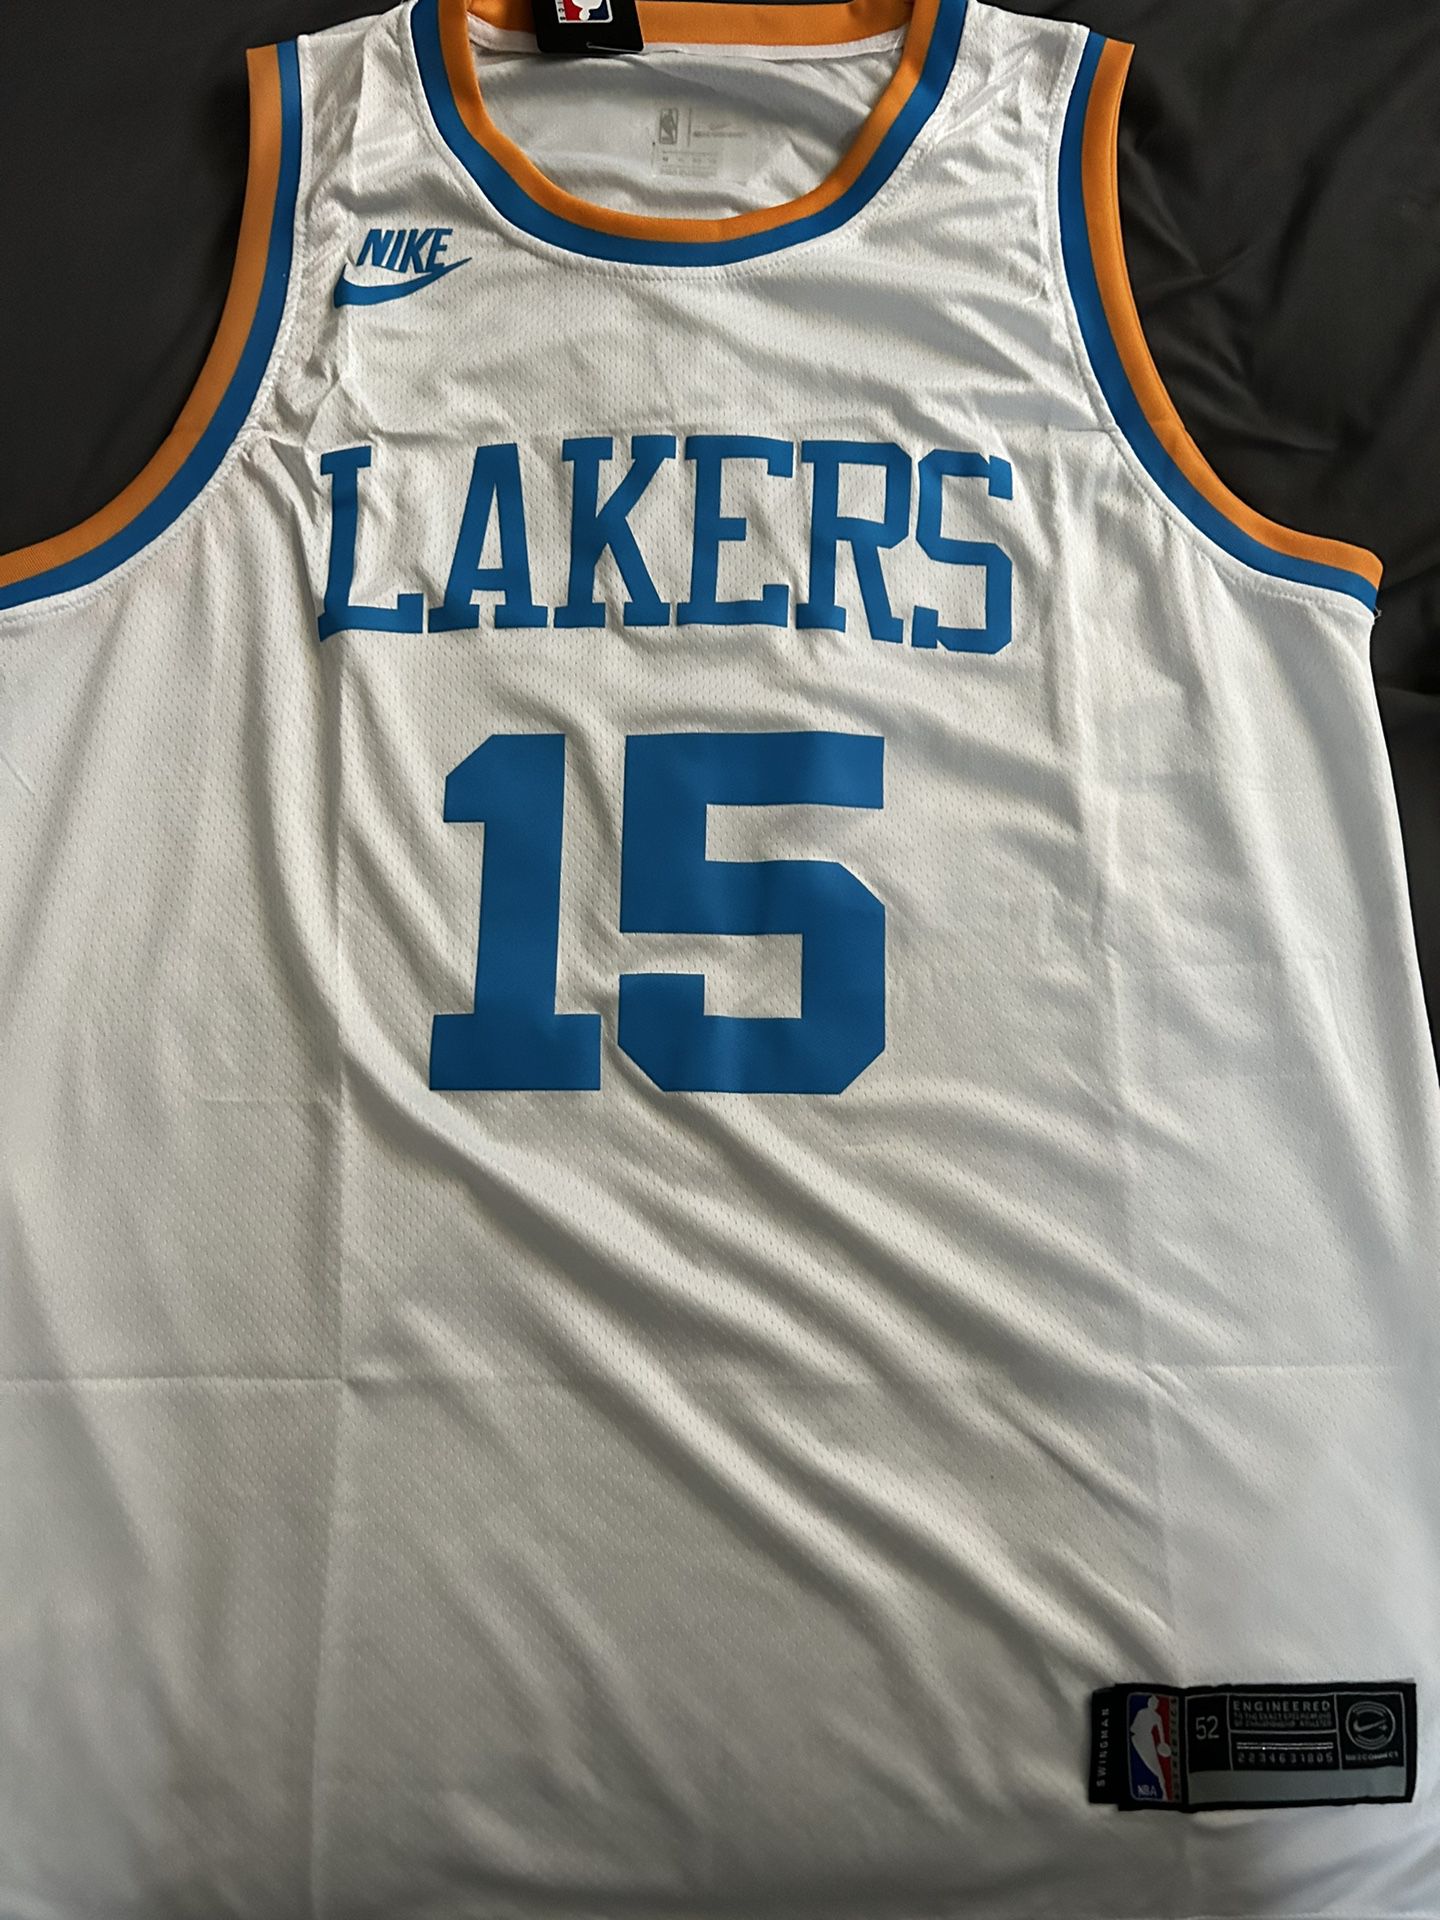 lakers classic jersey 2021